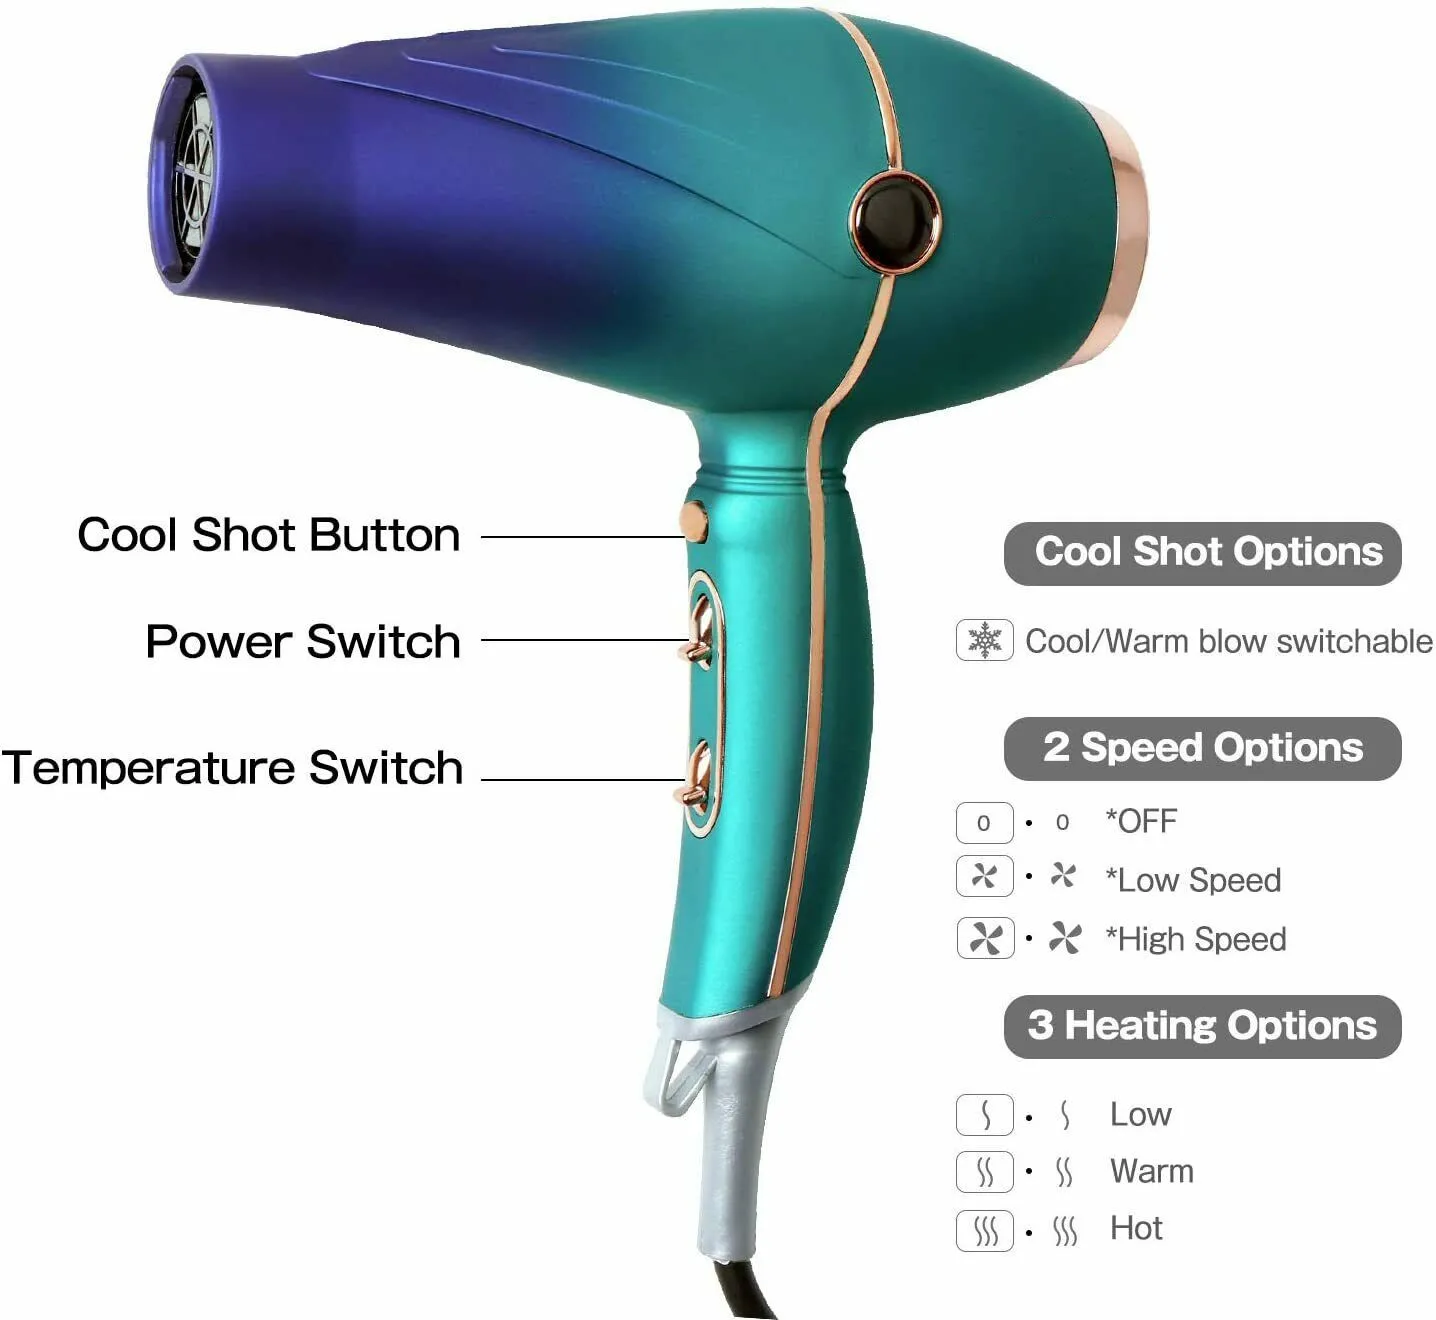 Professional Salon Hair Dryer 2300W Powerful AC Motor Home Use Blow Dryer Machine with Negative